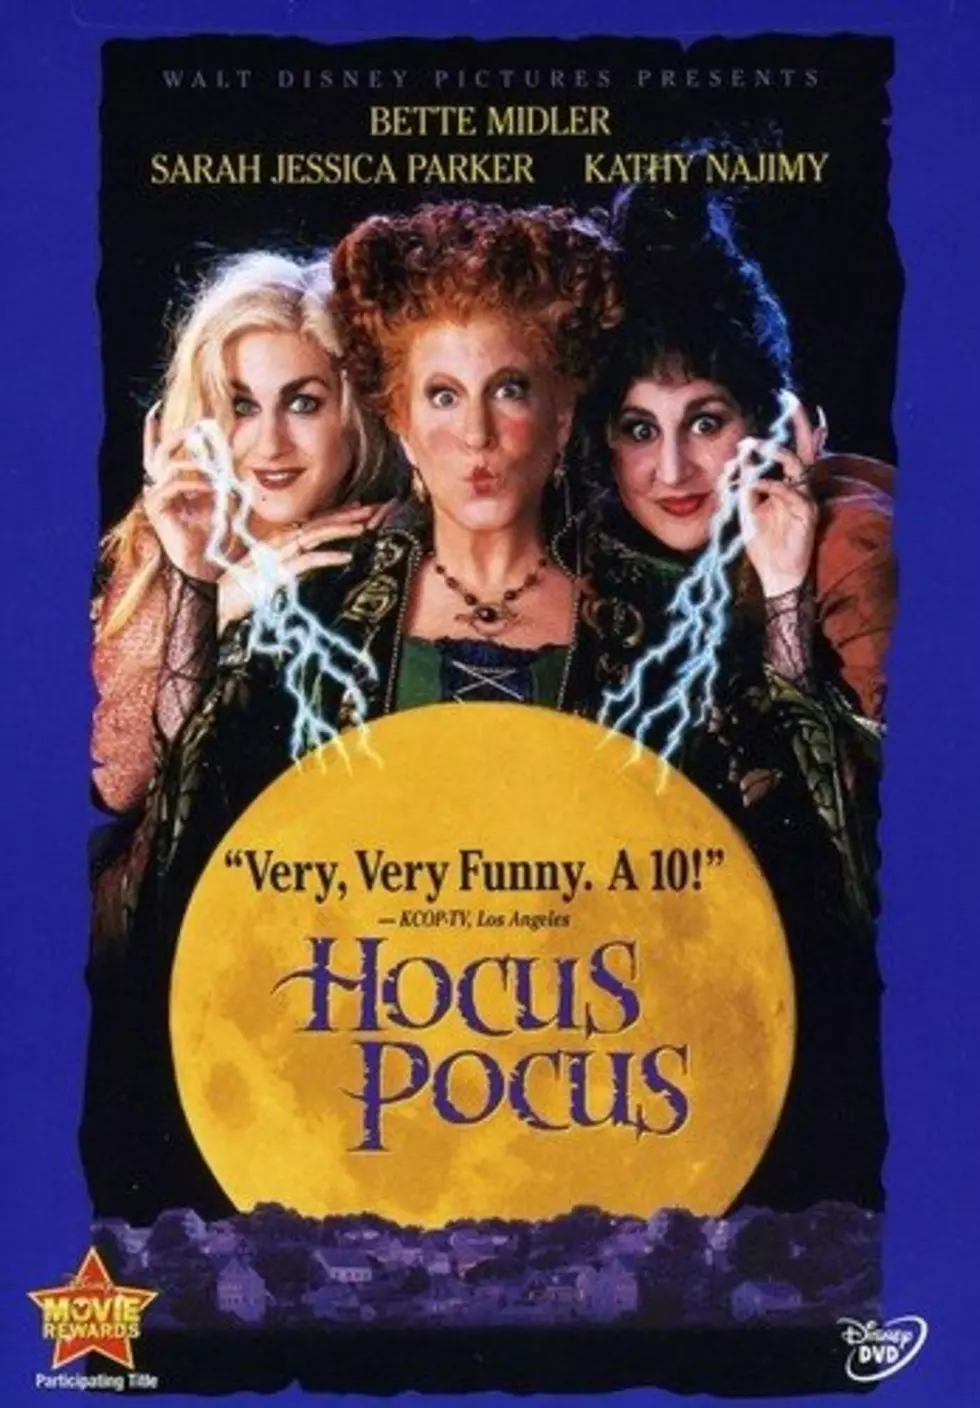 Hocus Pocus Coming Back to Theaters for its 25th Anniversary